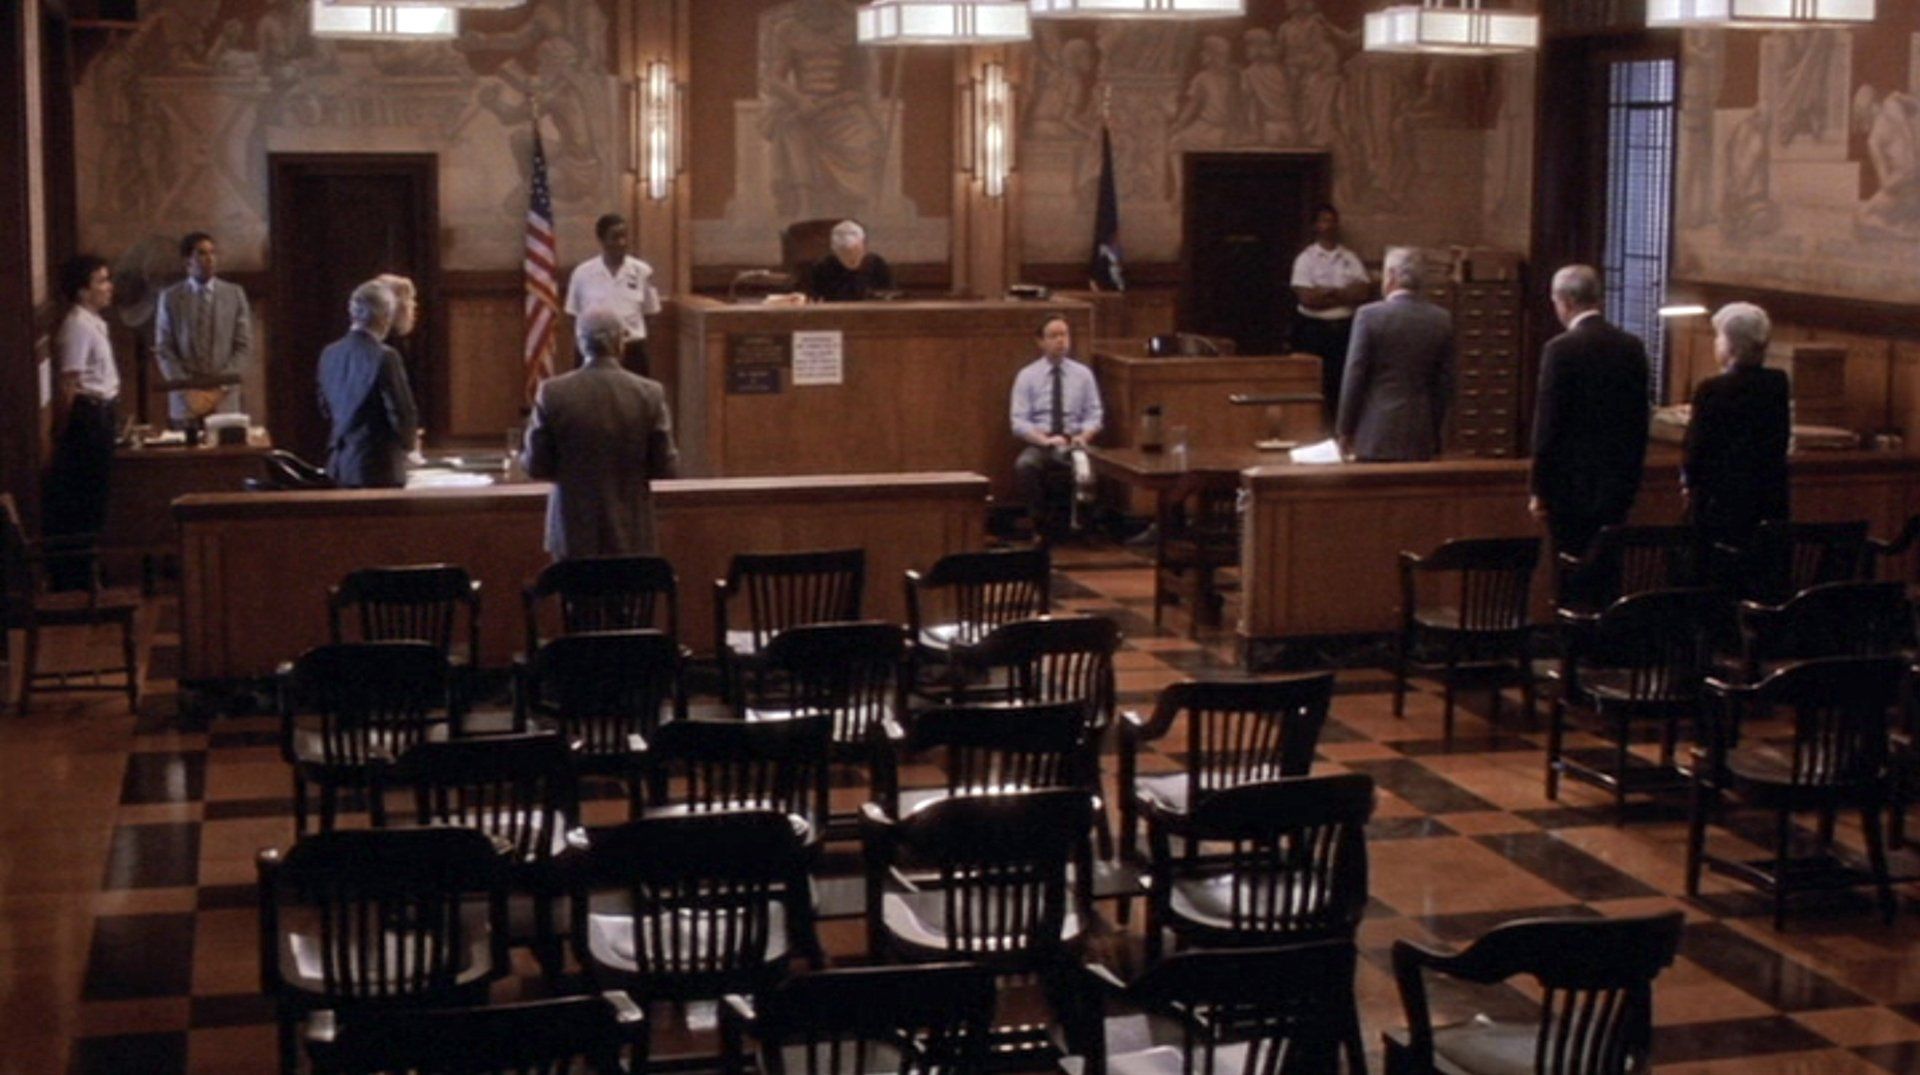 The courtroom set for NUTS.